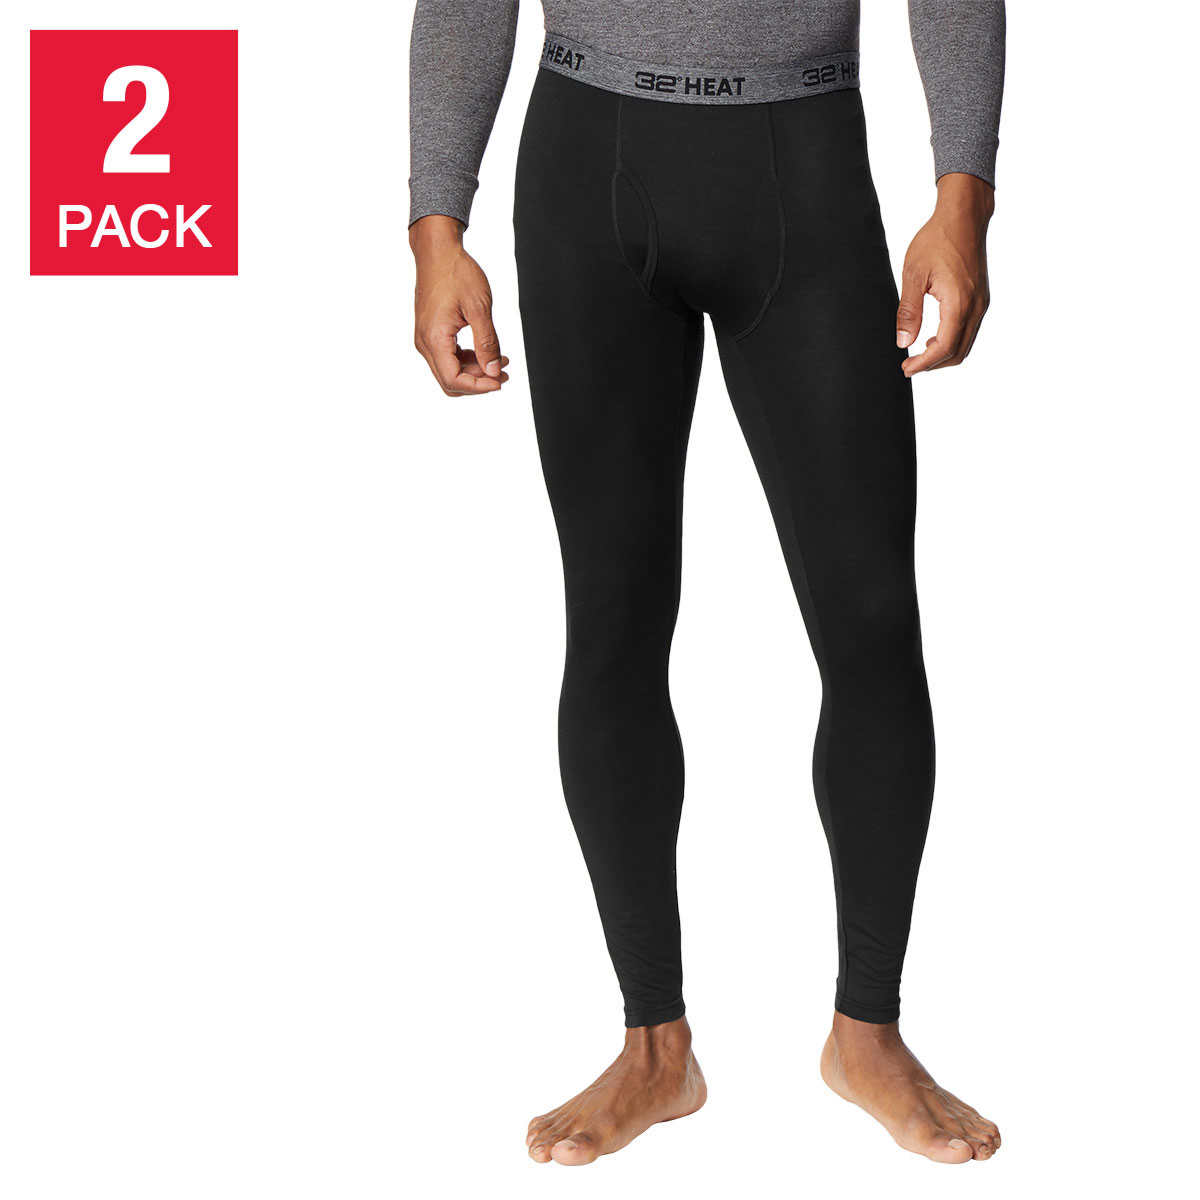 HEAD Mens Thermal Underwear Base Layer - Performance Pants Men Warm and  Comfortable Warm Winter